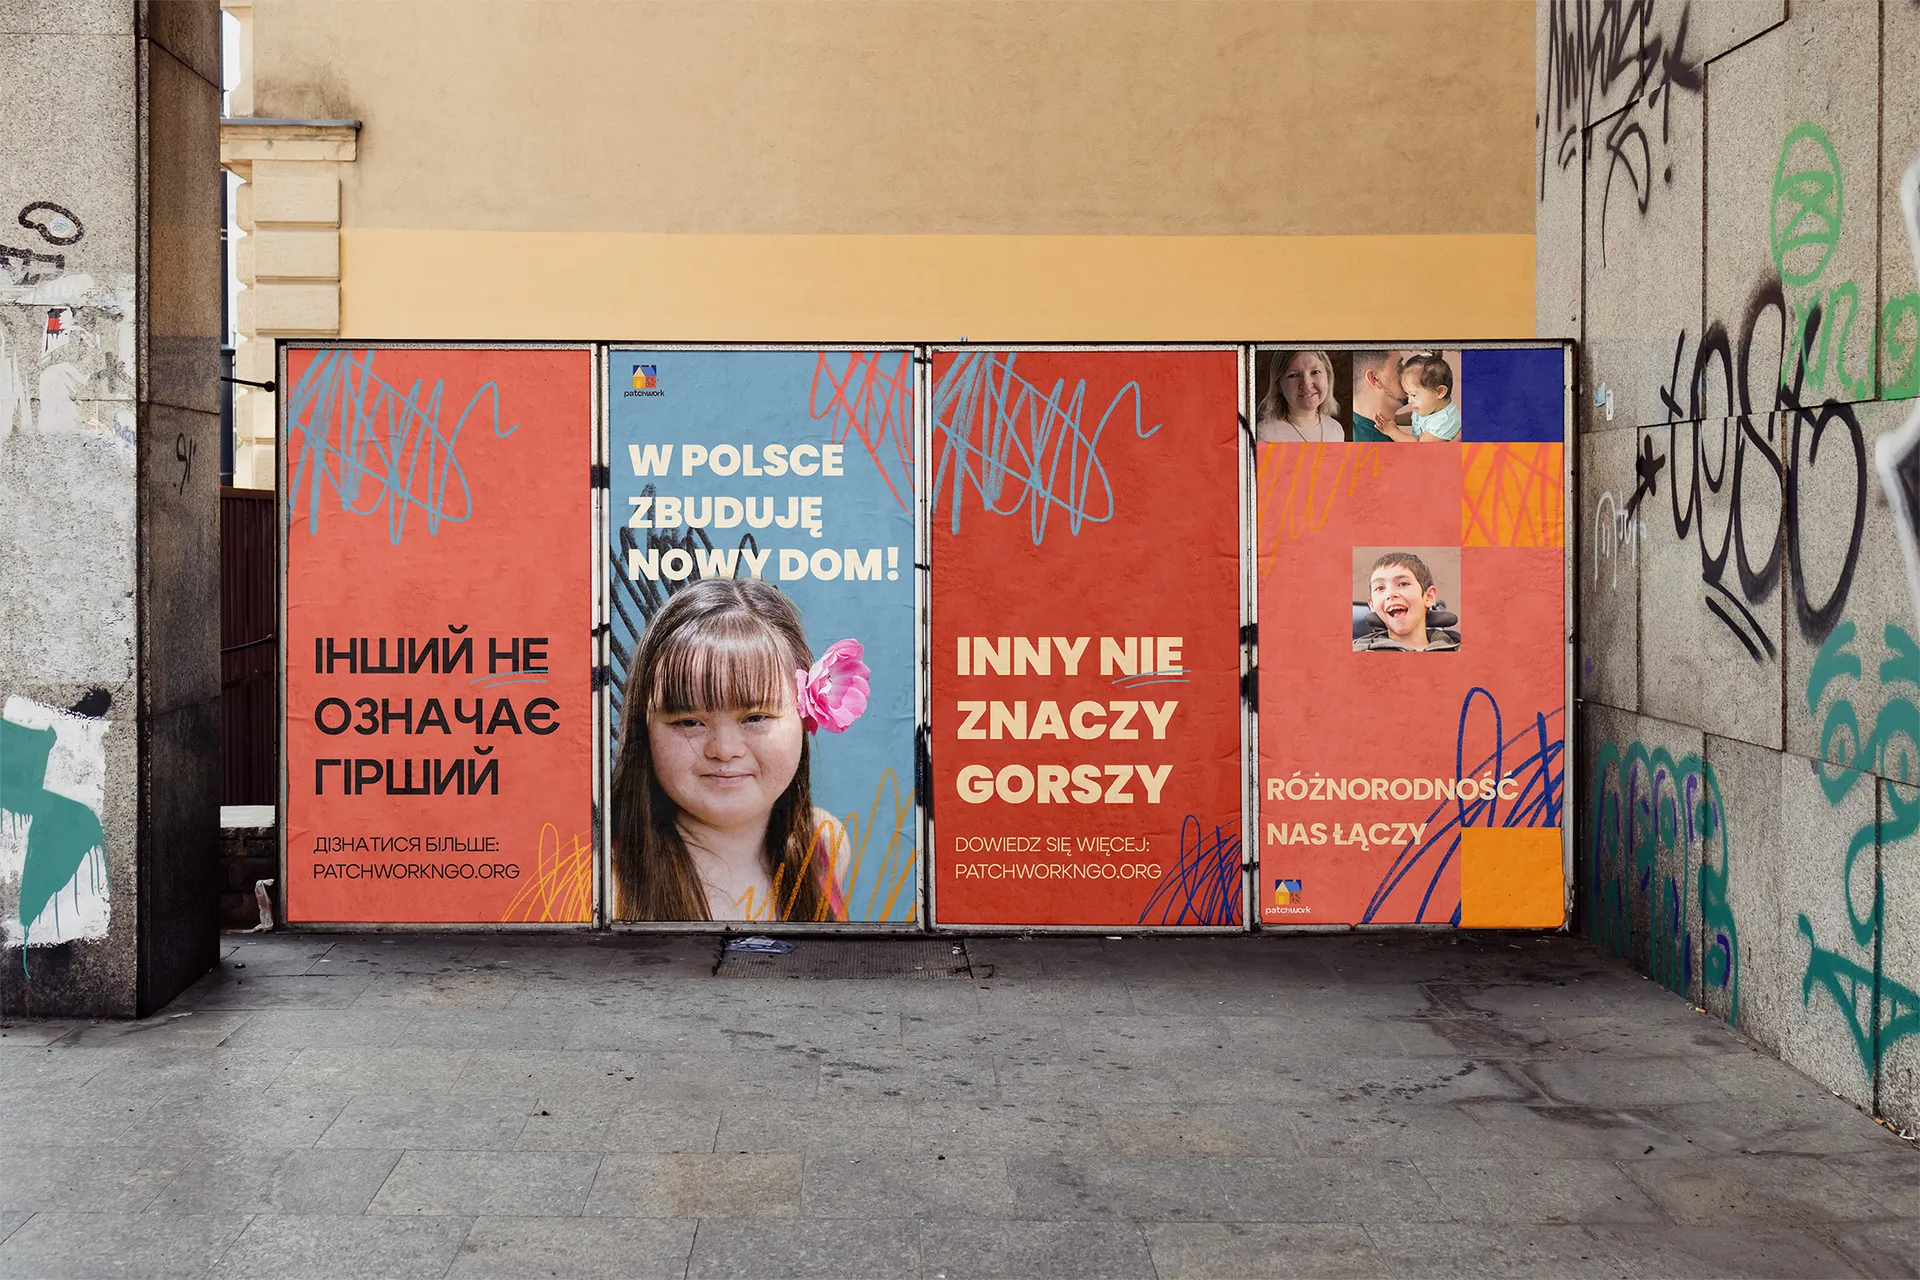 posters of patchwork organization in the urban landscape with slogans "in Poland I will build a new home", "different does not mean worse", "diversity unites"